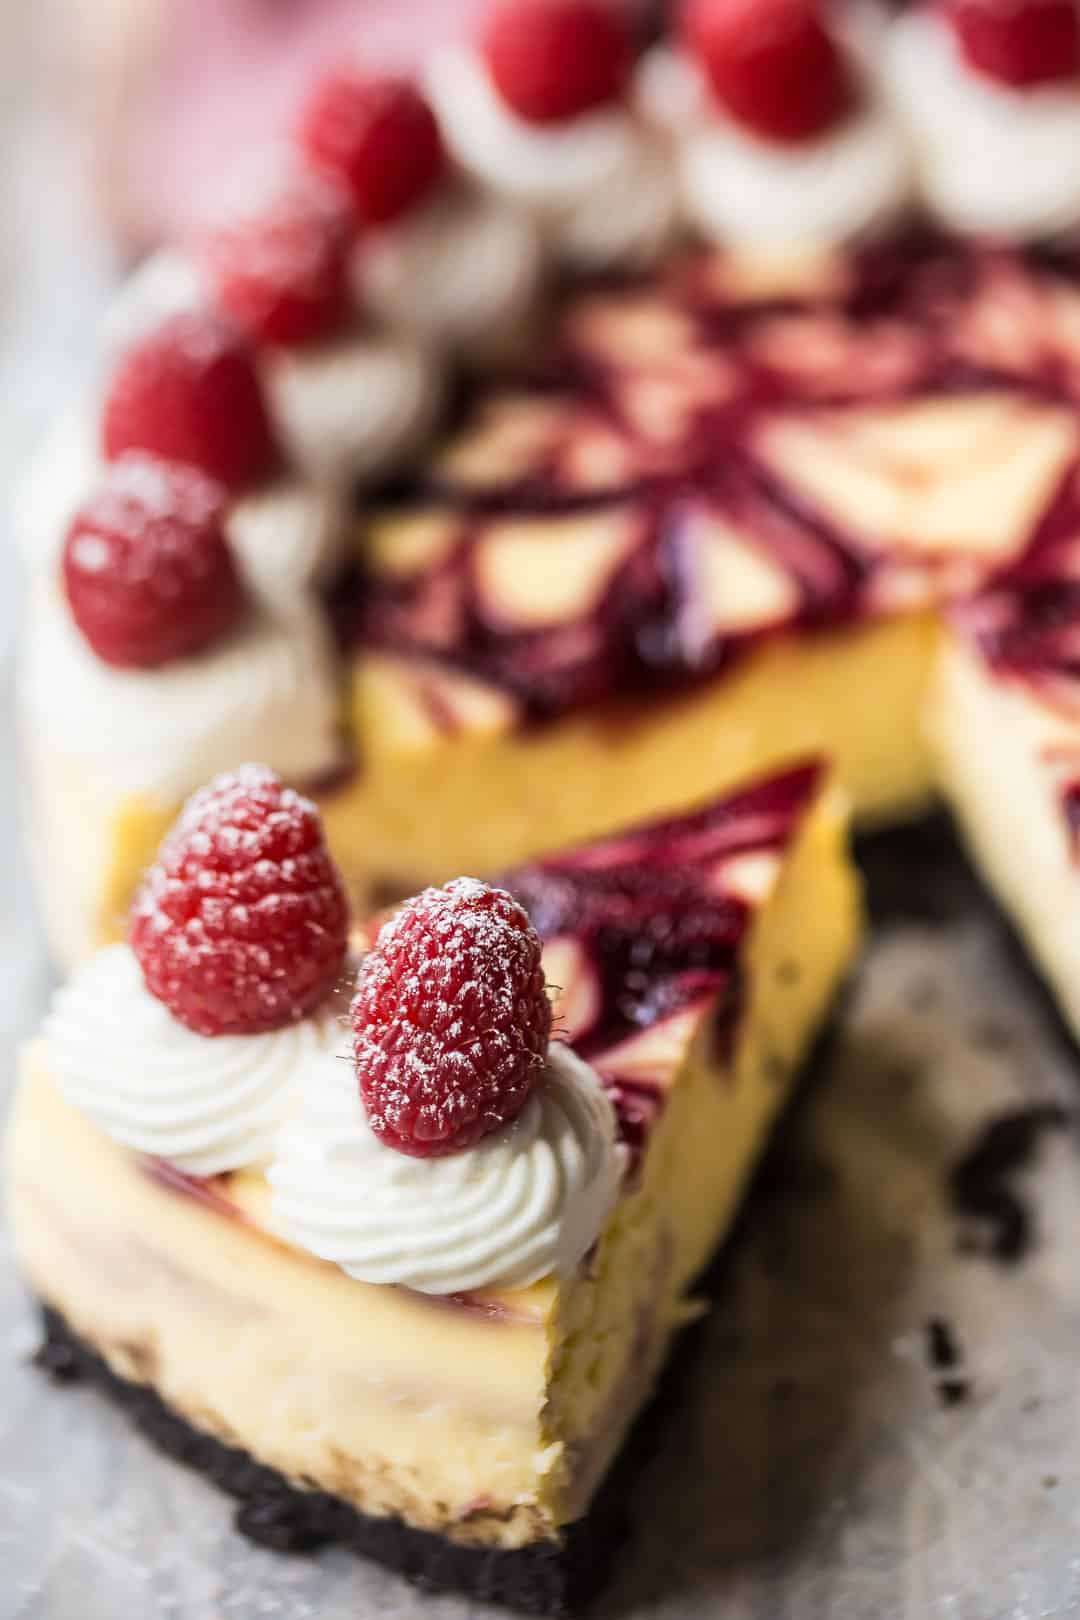 White chocolate raspberry cheesecake slice on a distressed wood table.